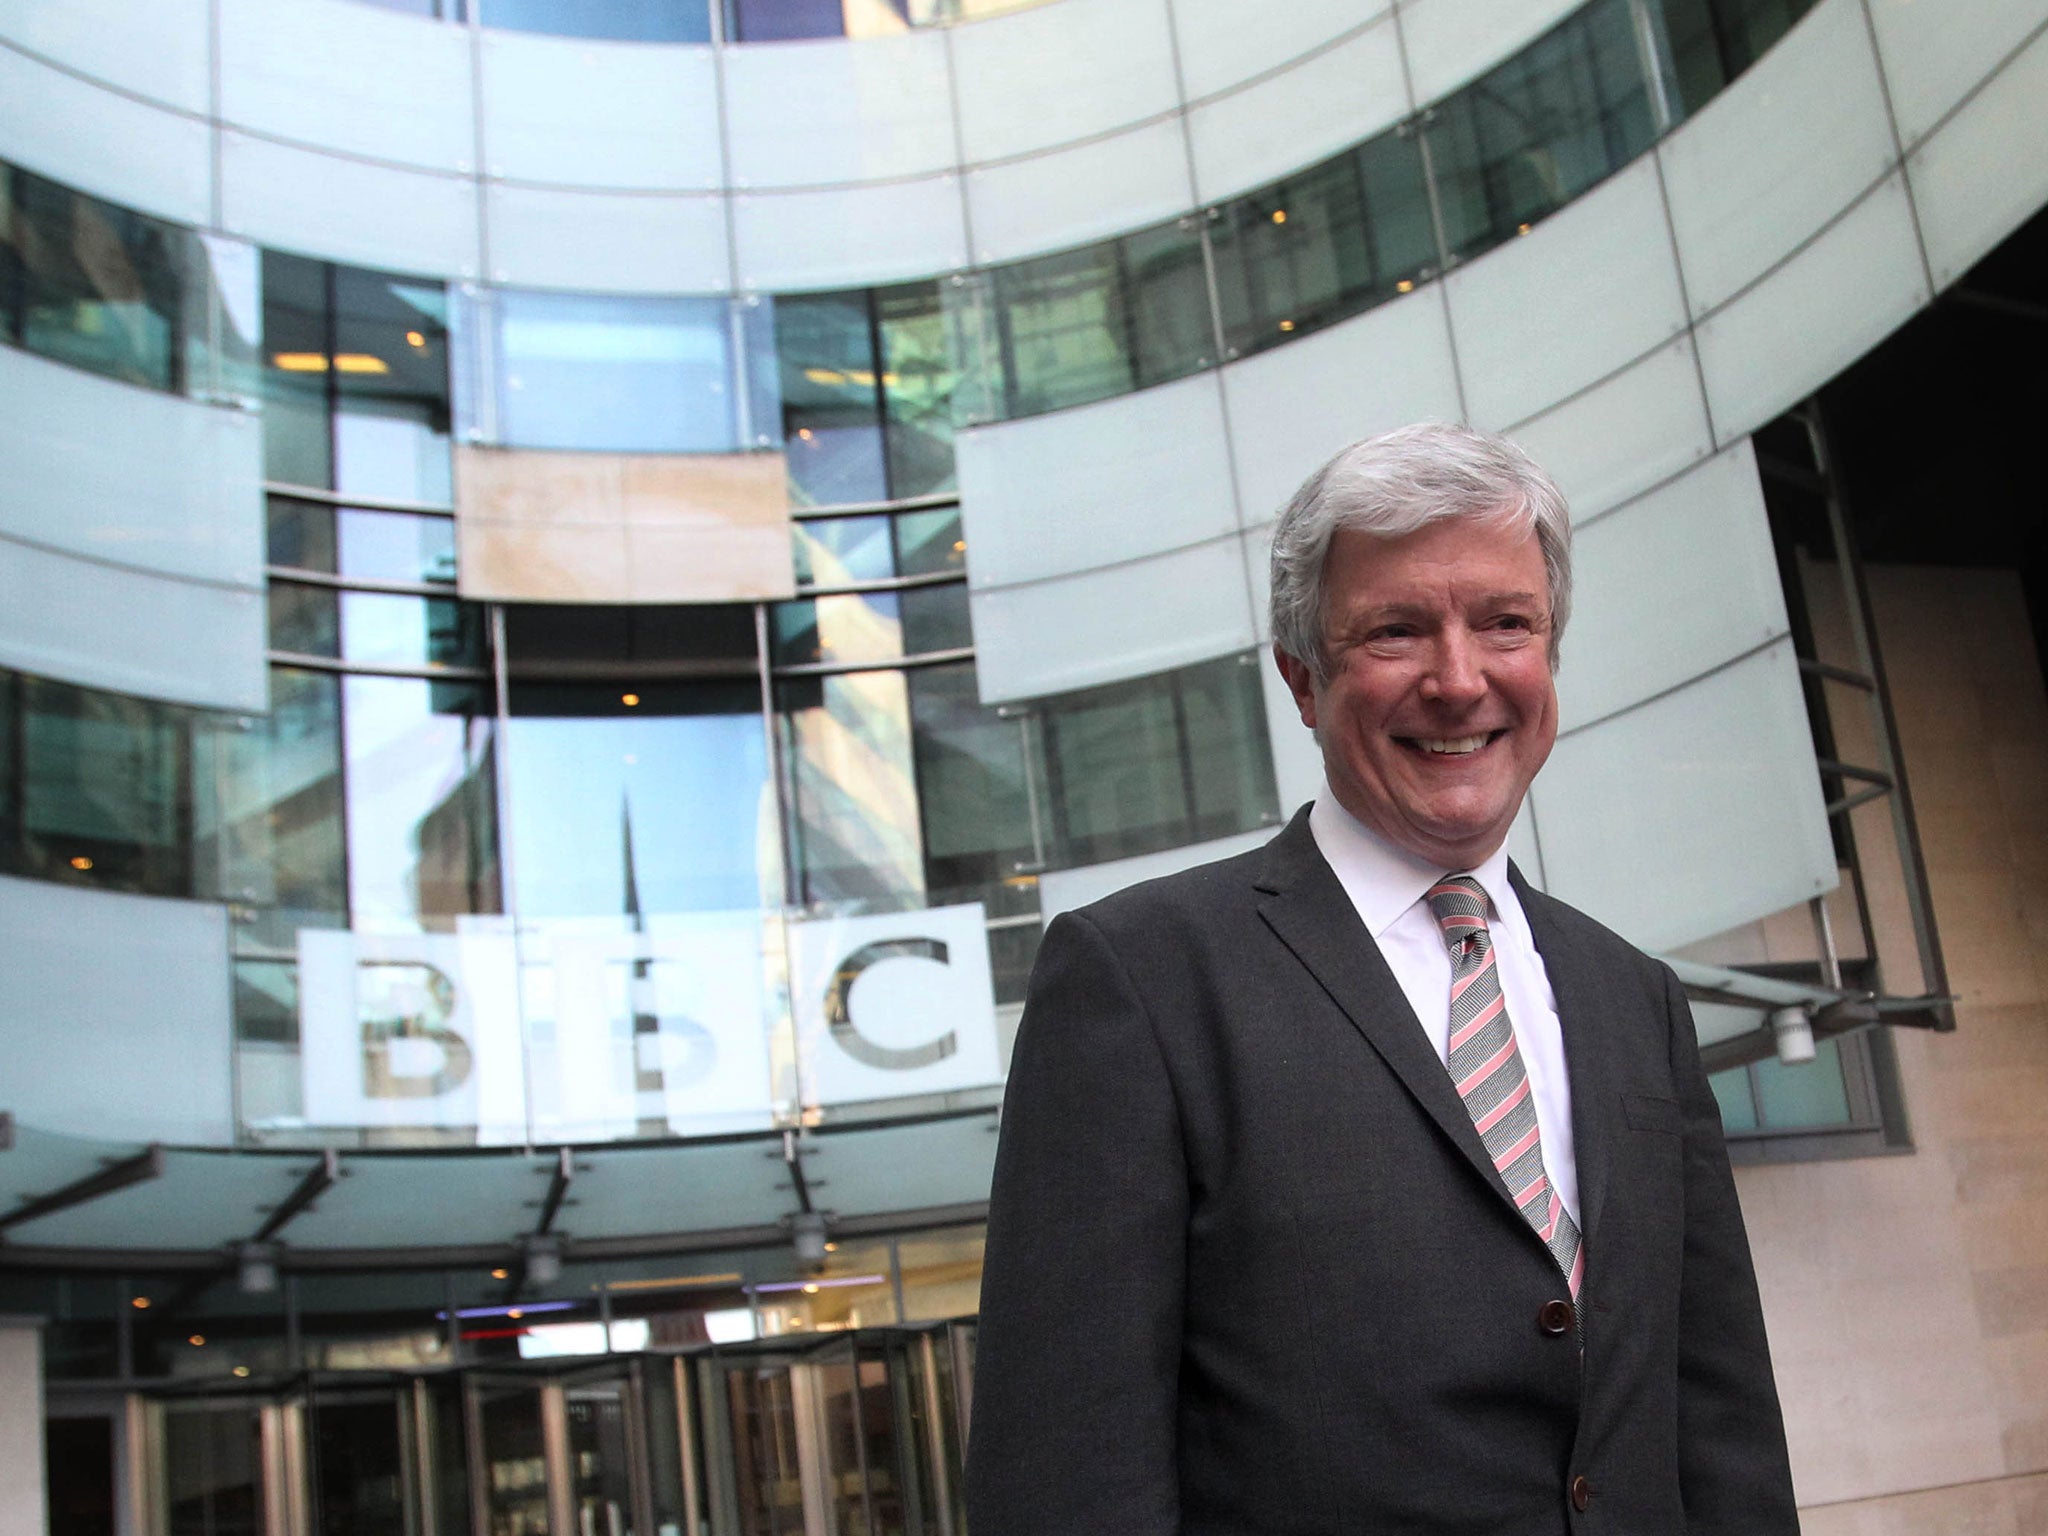 Tony Hall announced major changes to the BBC today